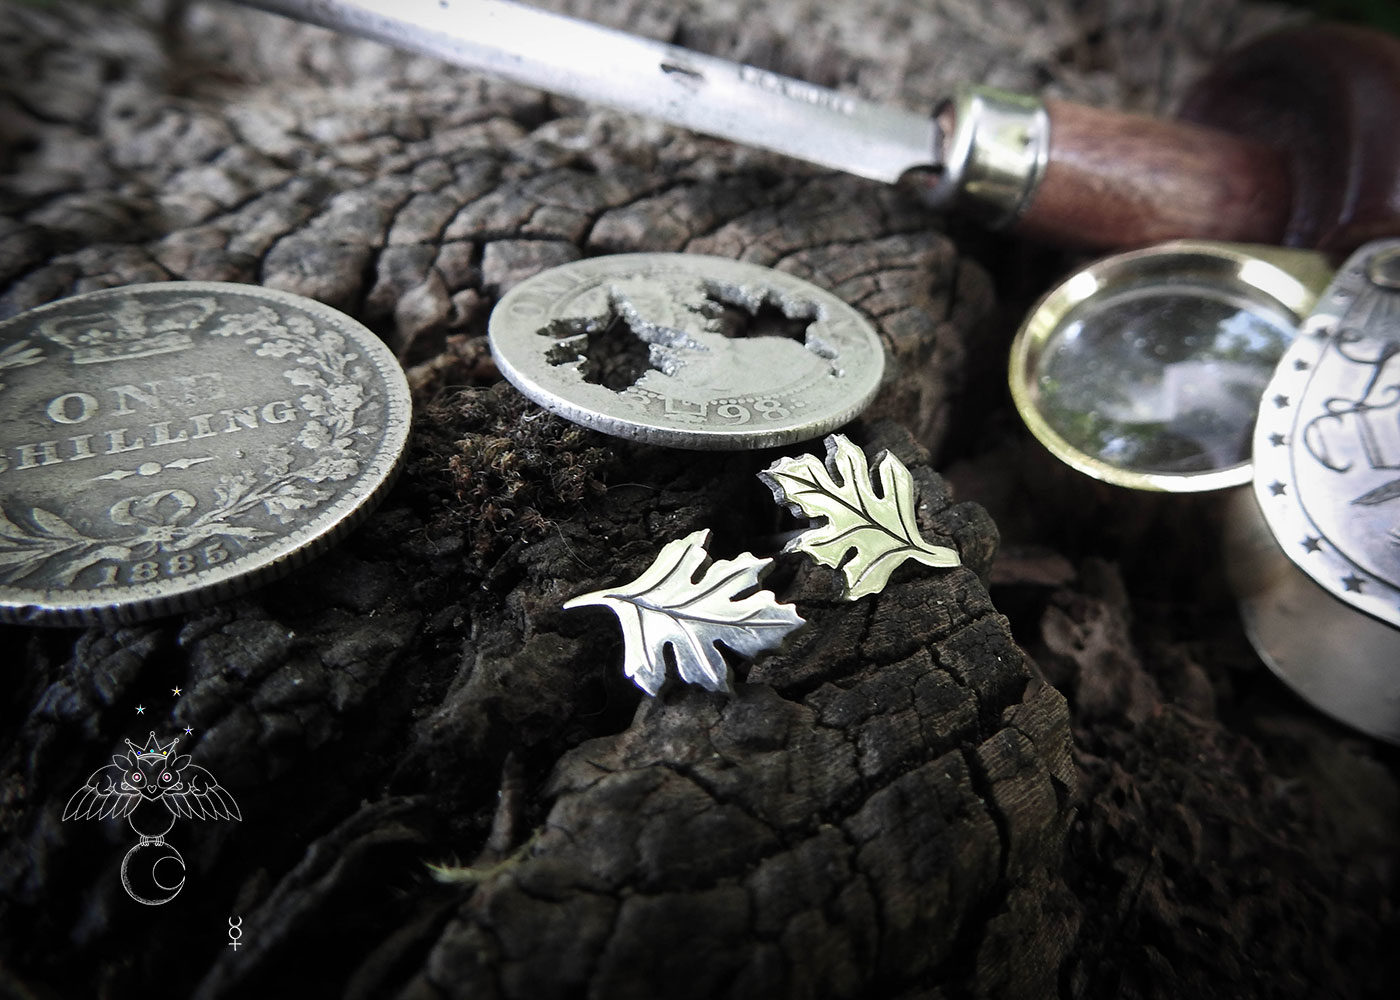 May Tree earrings - Hawthorn leaf stud earrings handcrafted and recycled from a 100 year old silver shilling. 